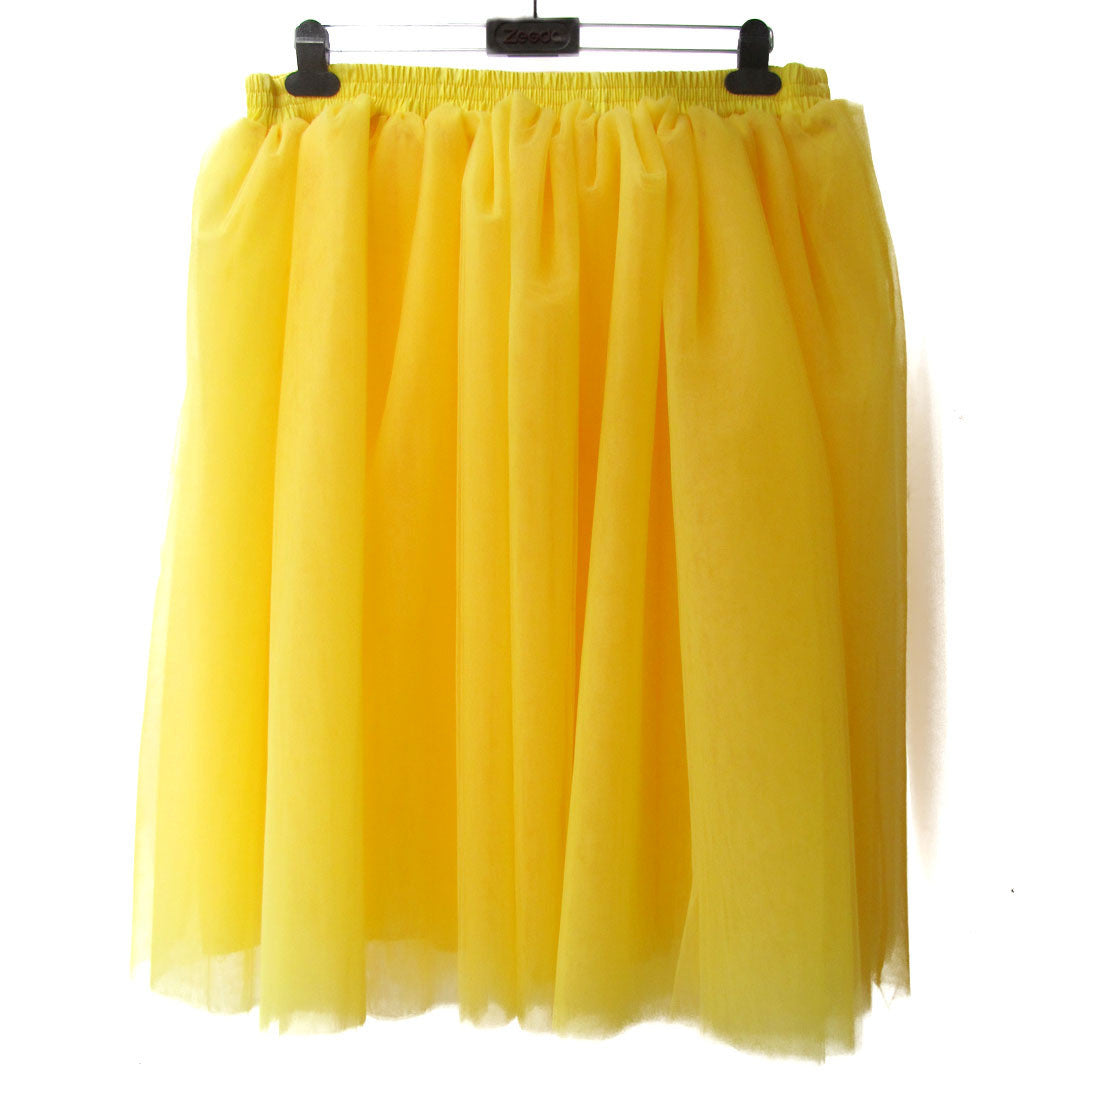 Lovely 7 Layers Pleated Flared Veil Skirt - Oh Yours Fashion - 4